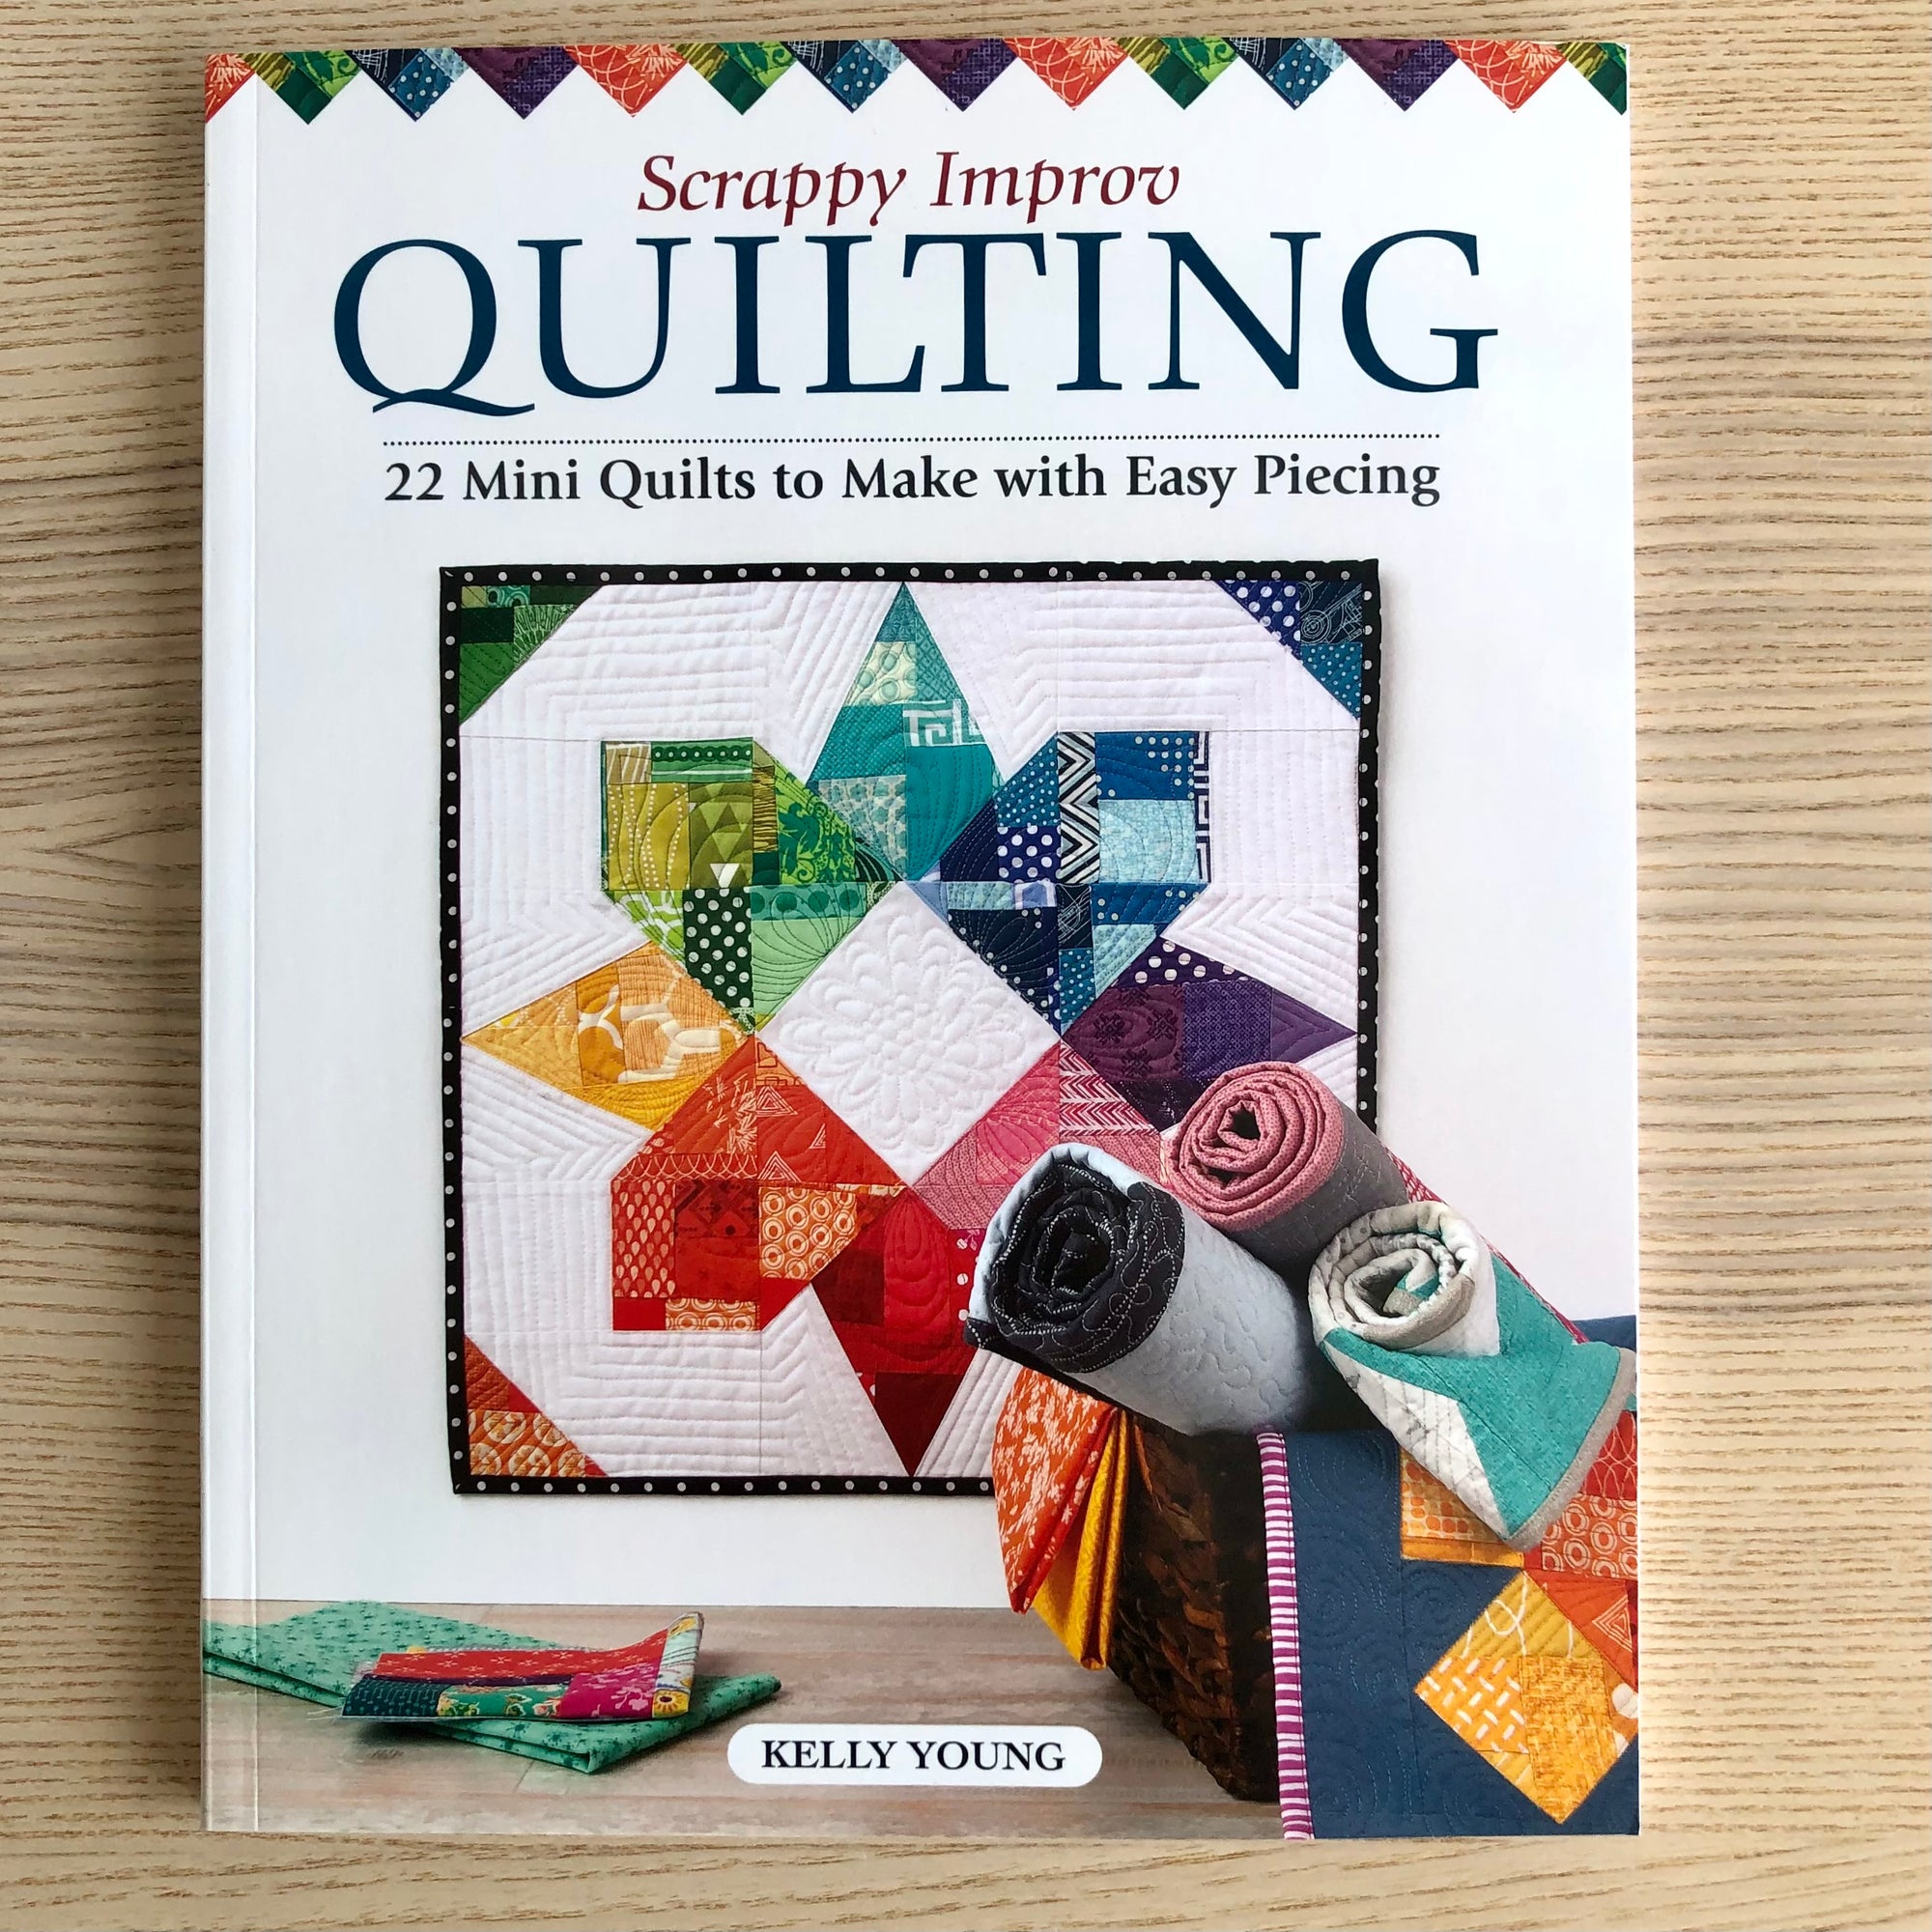 Scrappy Improv Quilting - 22 Mini Quilts to Make with Easy Piecing